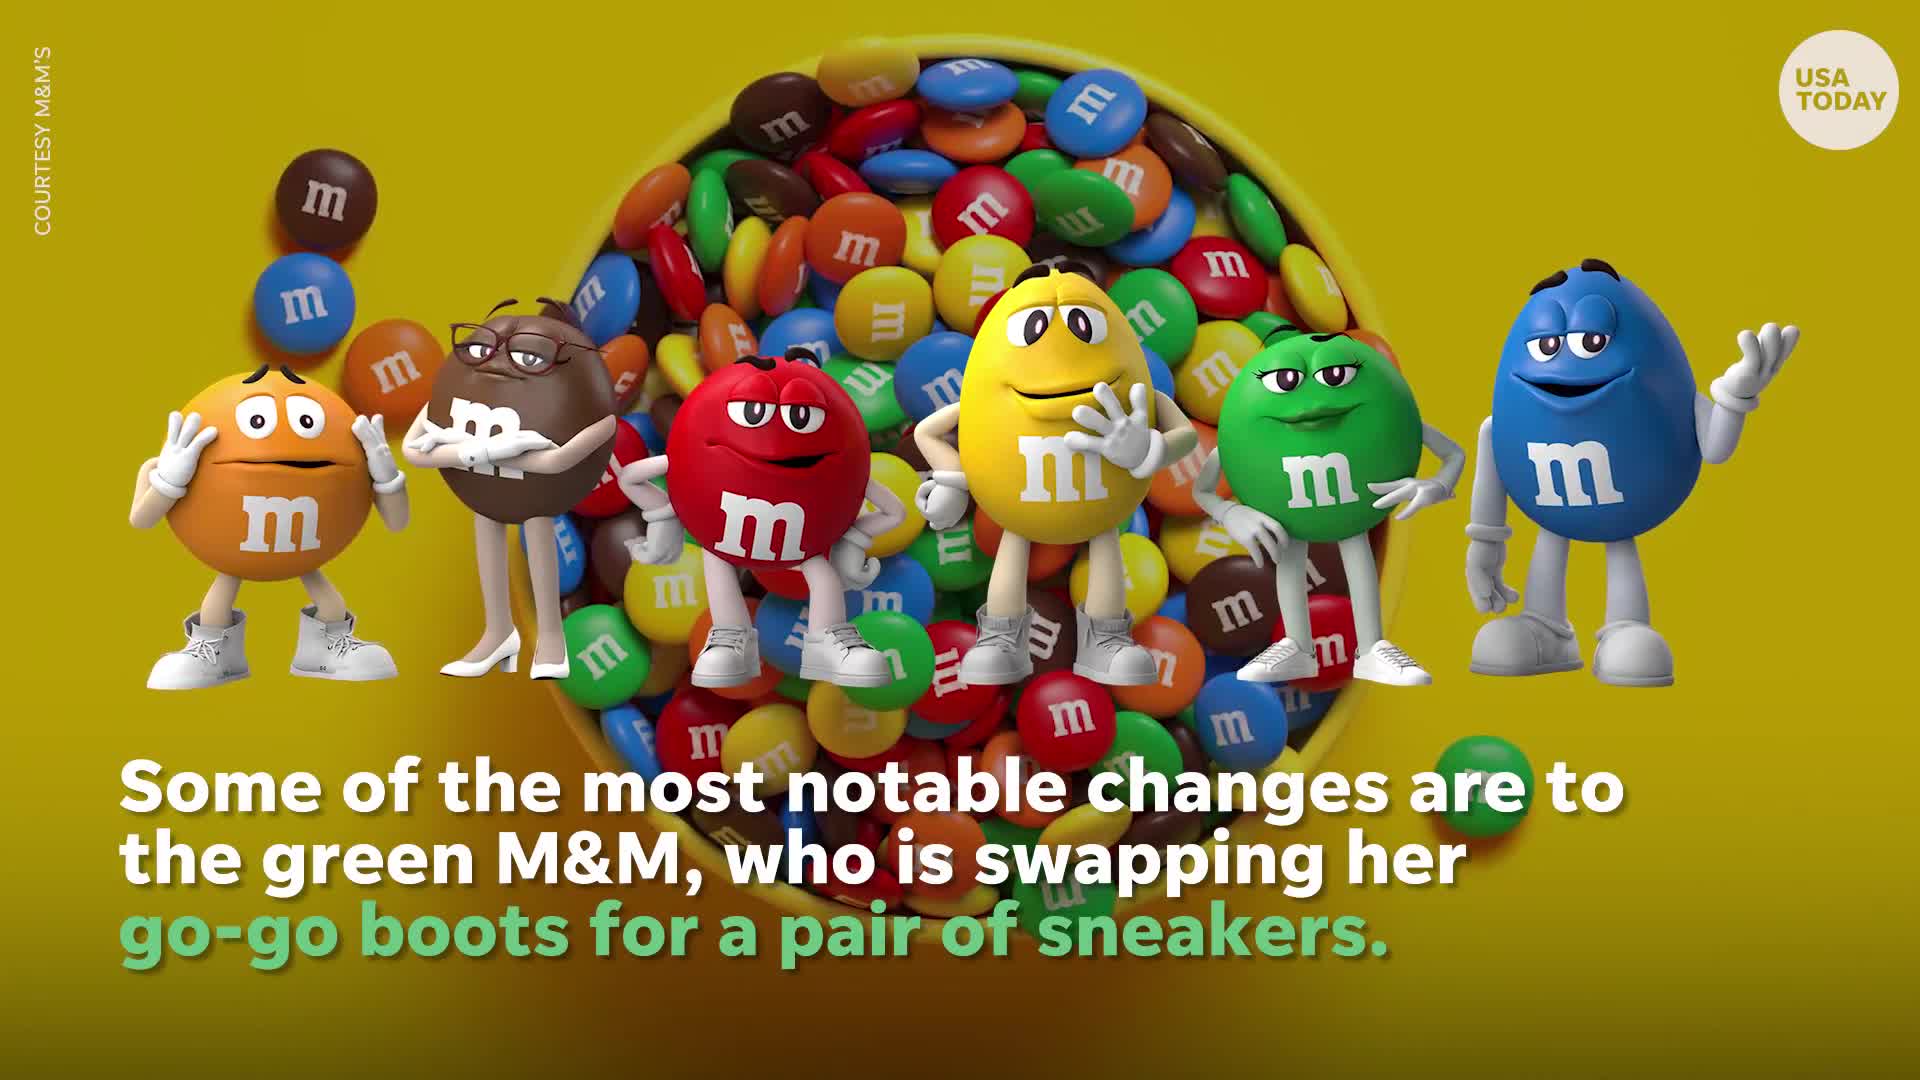 Meet Purple - the new M&M spokescandy character